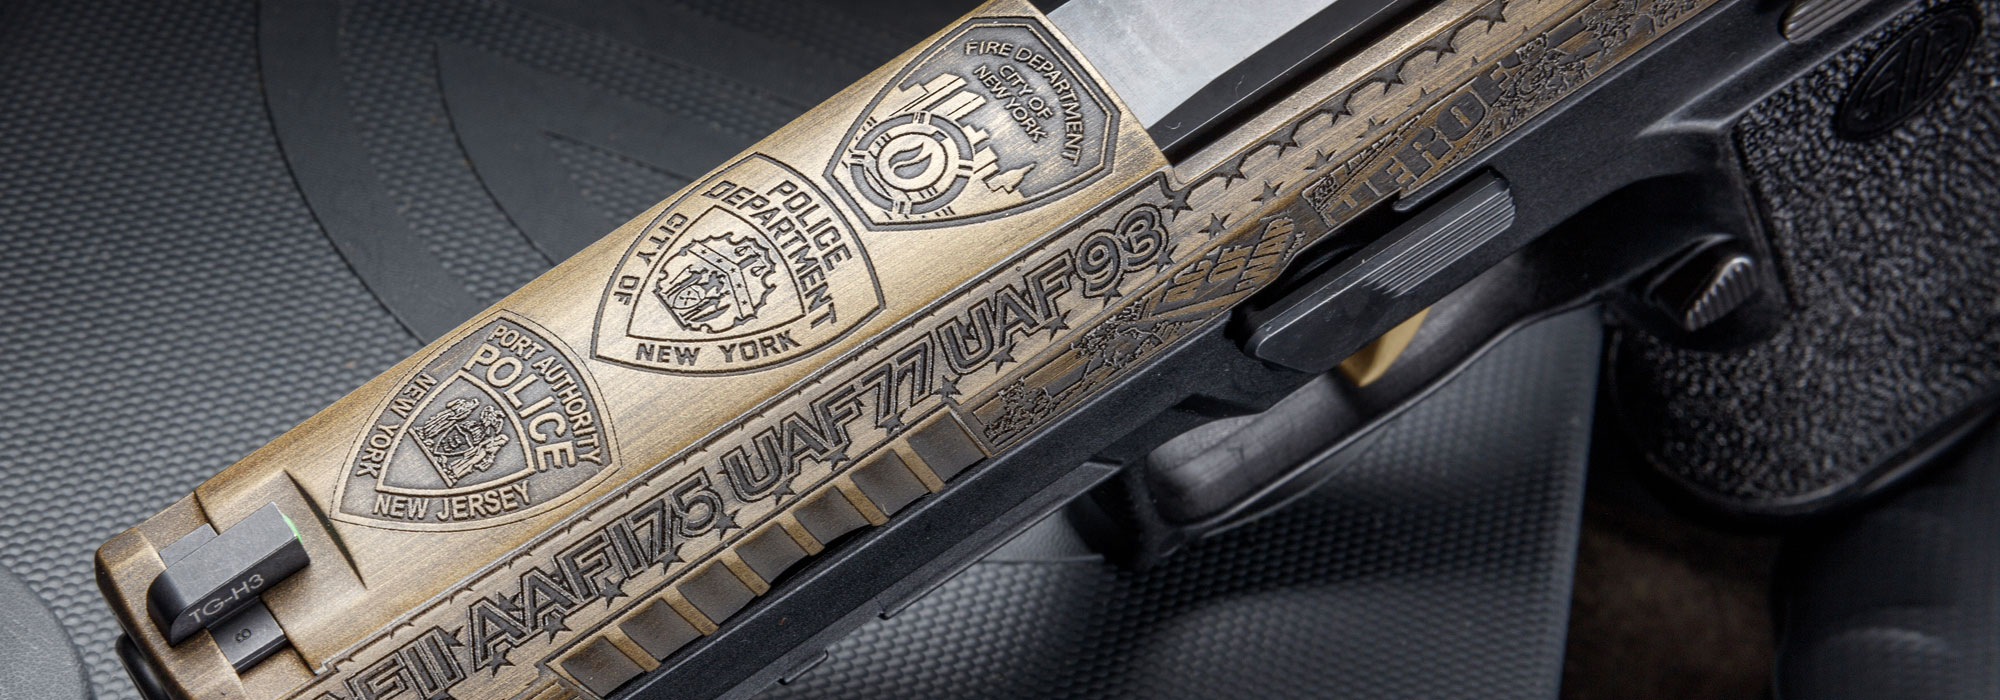 Guns & Ammo/SIG SAUER P320 FCU “Never Forget 9/11 Tribute” Pistol slide top view engravings